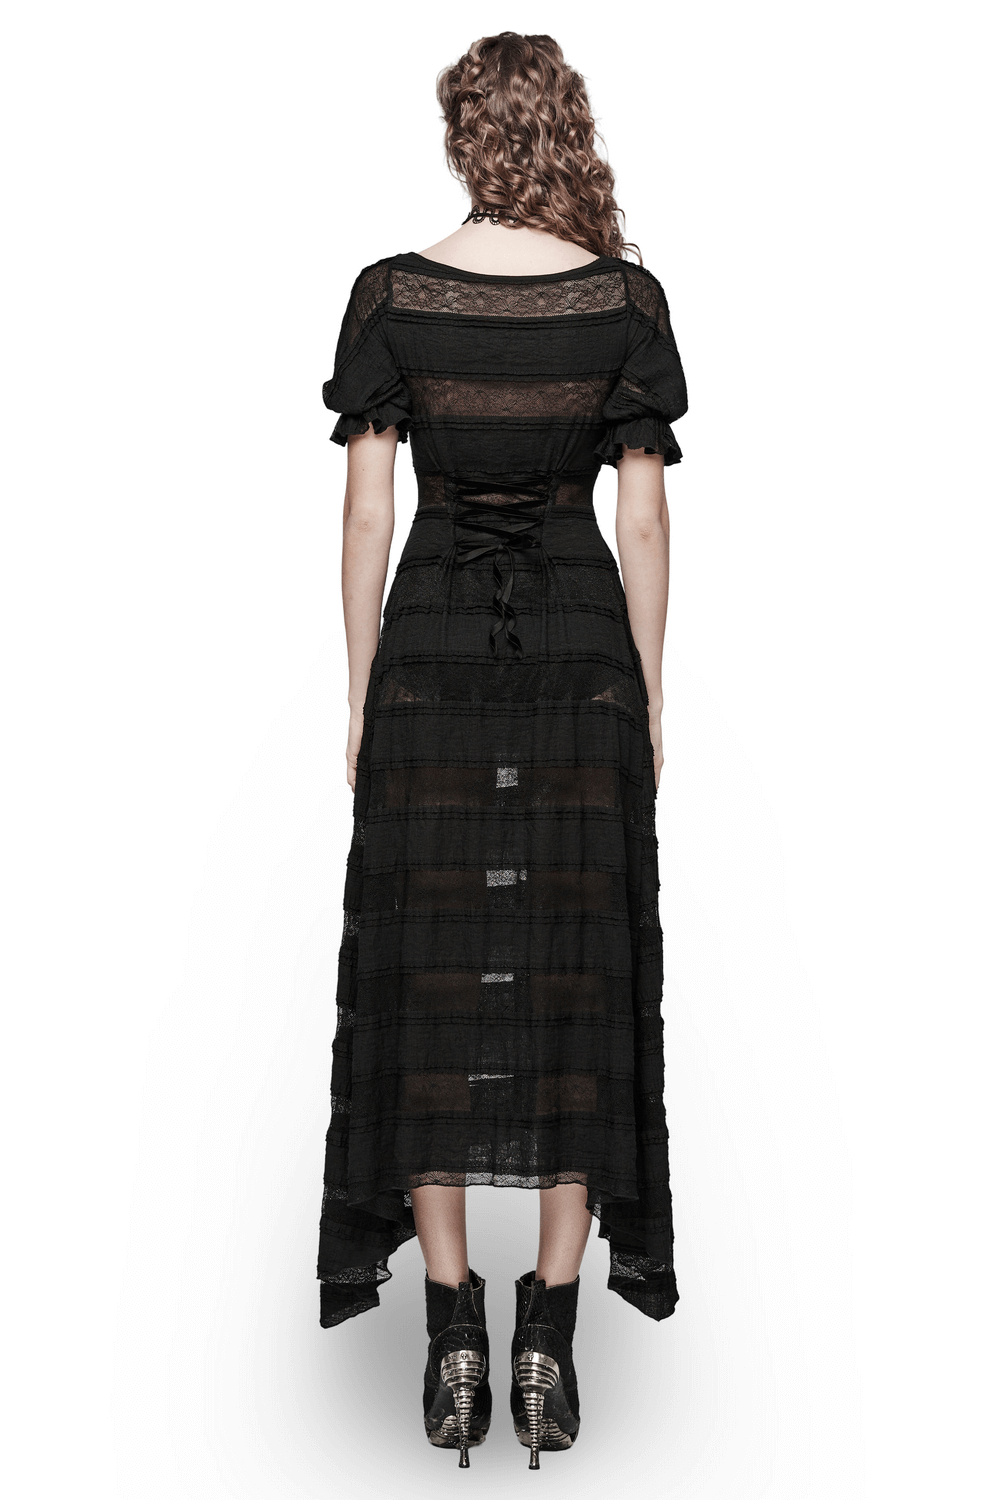 Ethereal Short Sleeves Lace High-Low Gothic Dress